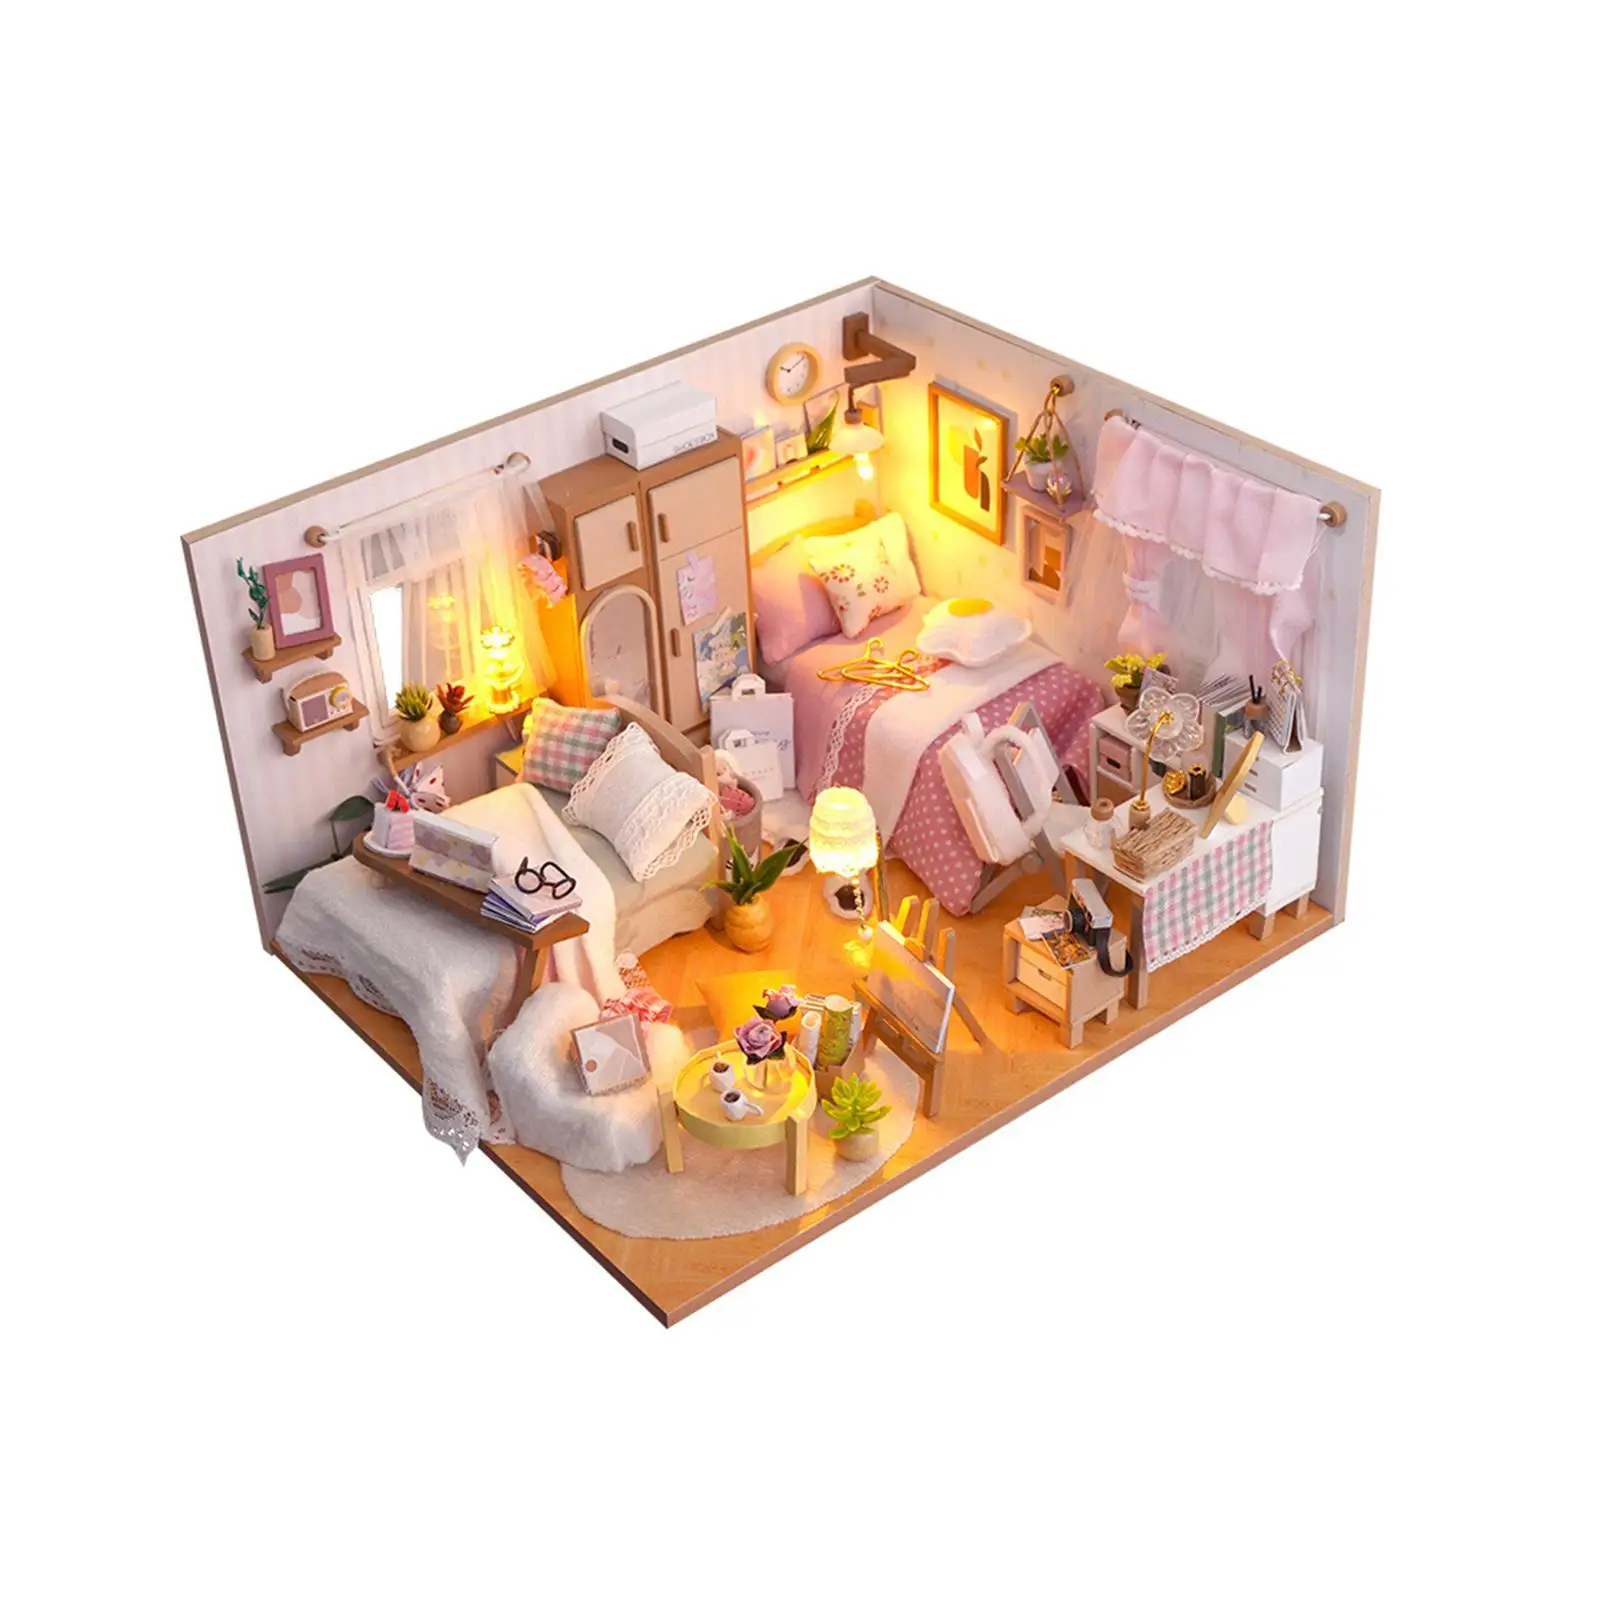 Wooden Miniature Dollhouse Kits Collectibles Birthday Gifts with Furniture Easy to Assemble for Kids Adults Doll House Model